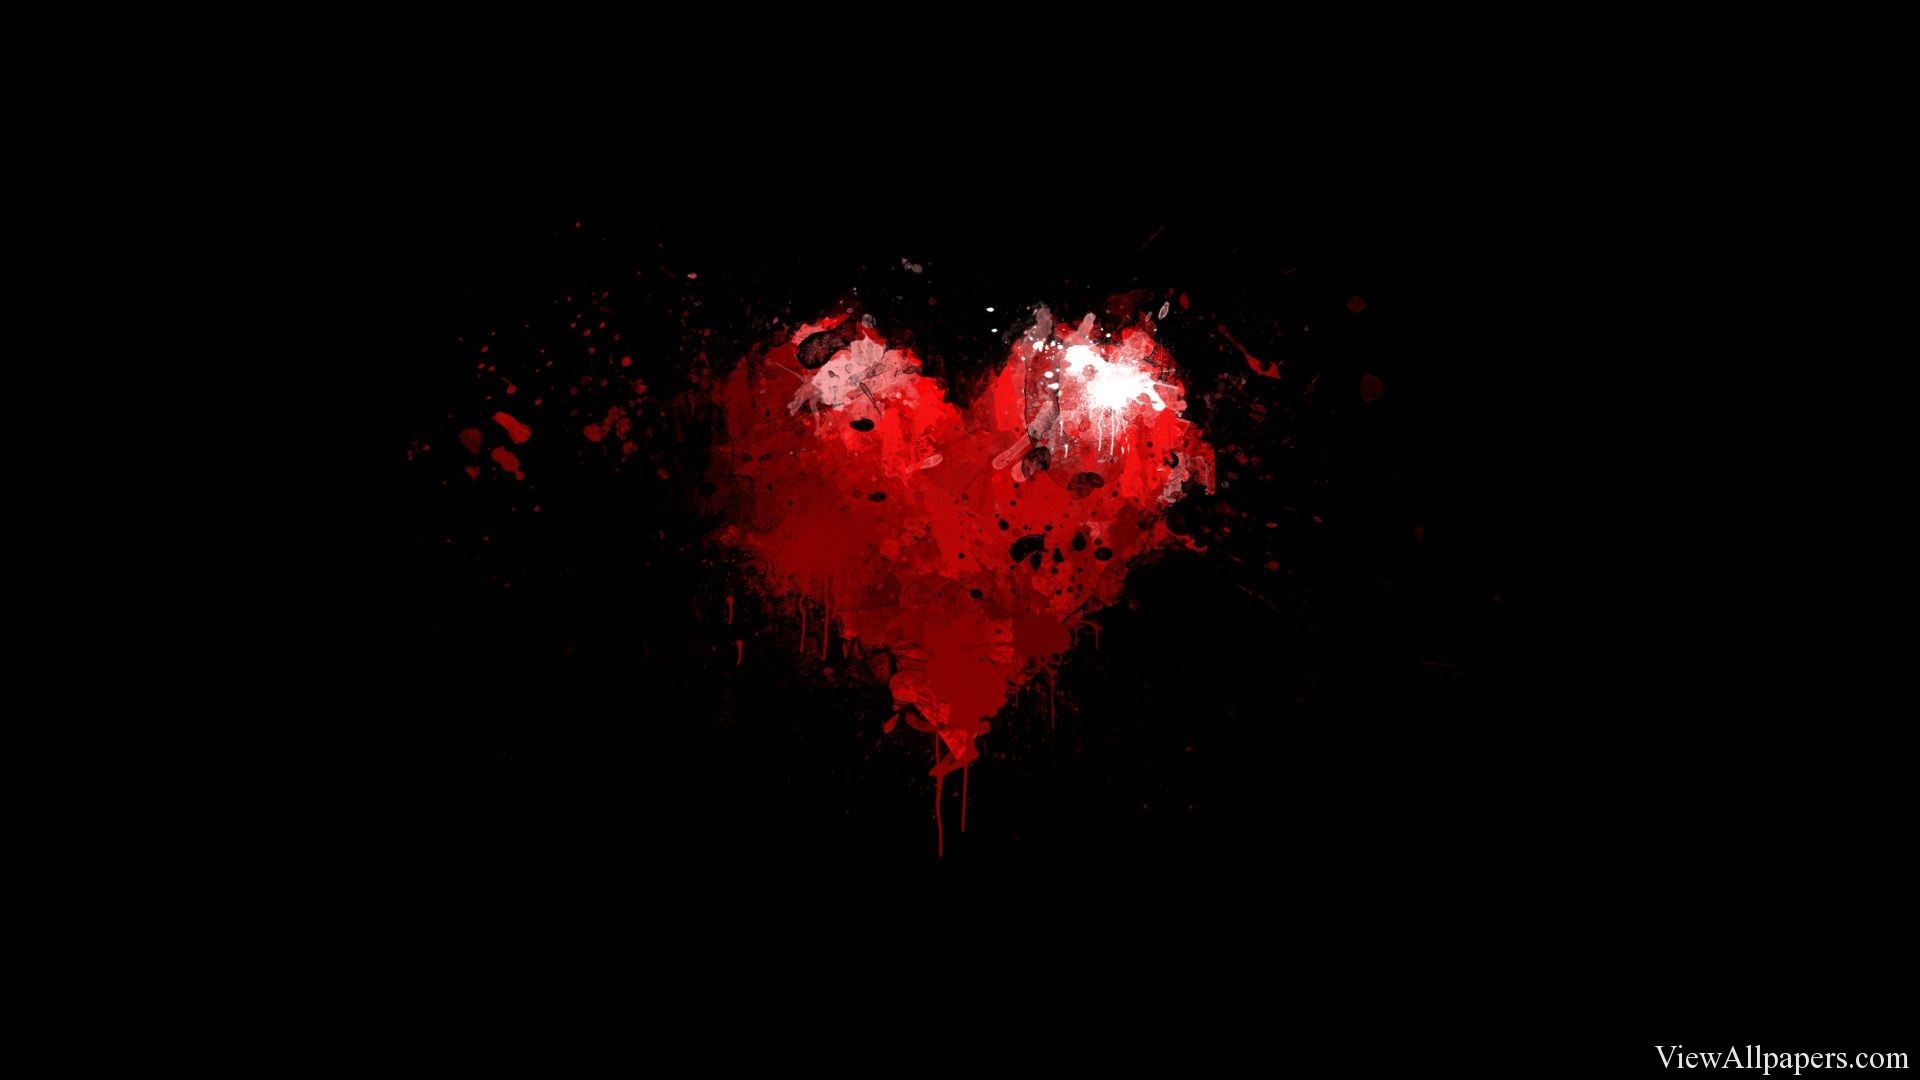 1920x1080 Painted Red Heart on Black Background Wallpaper